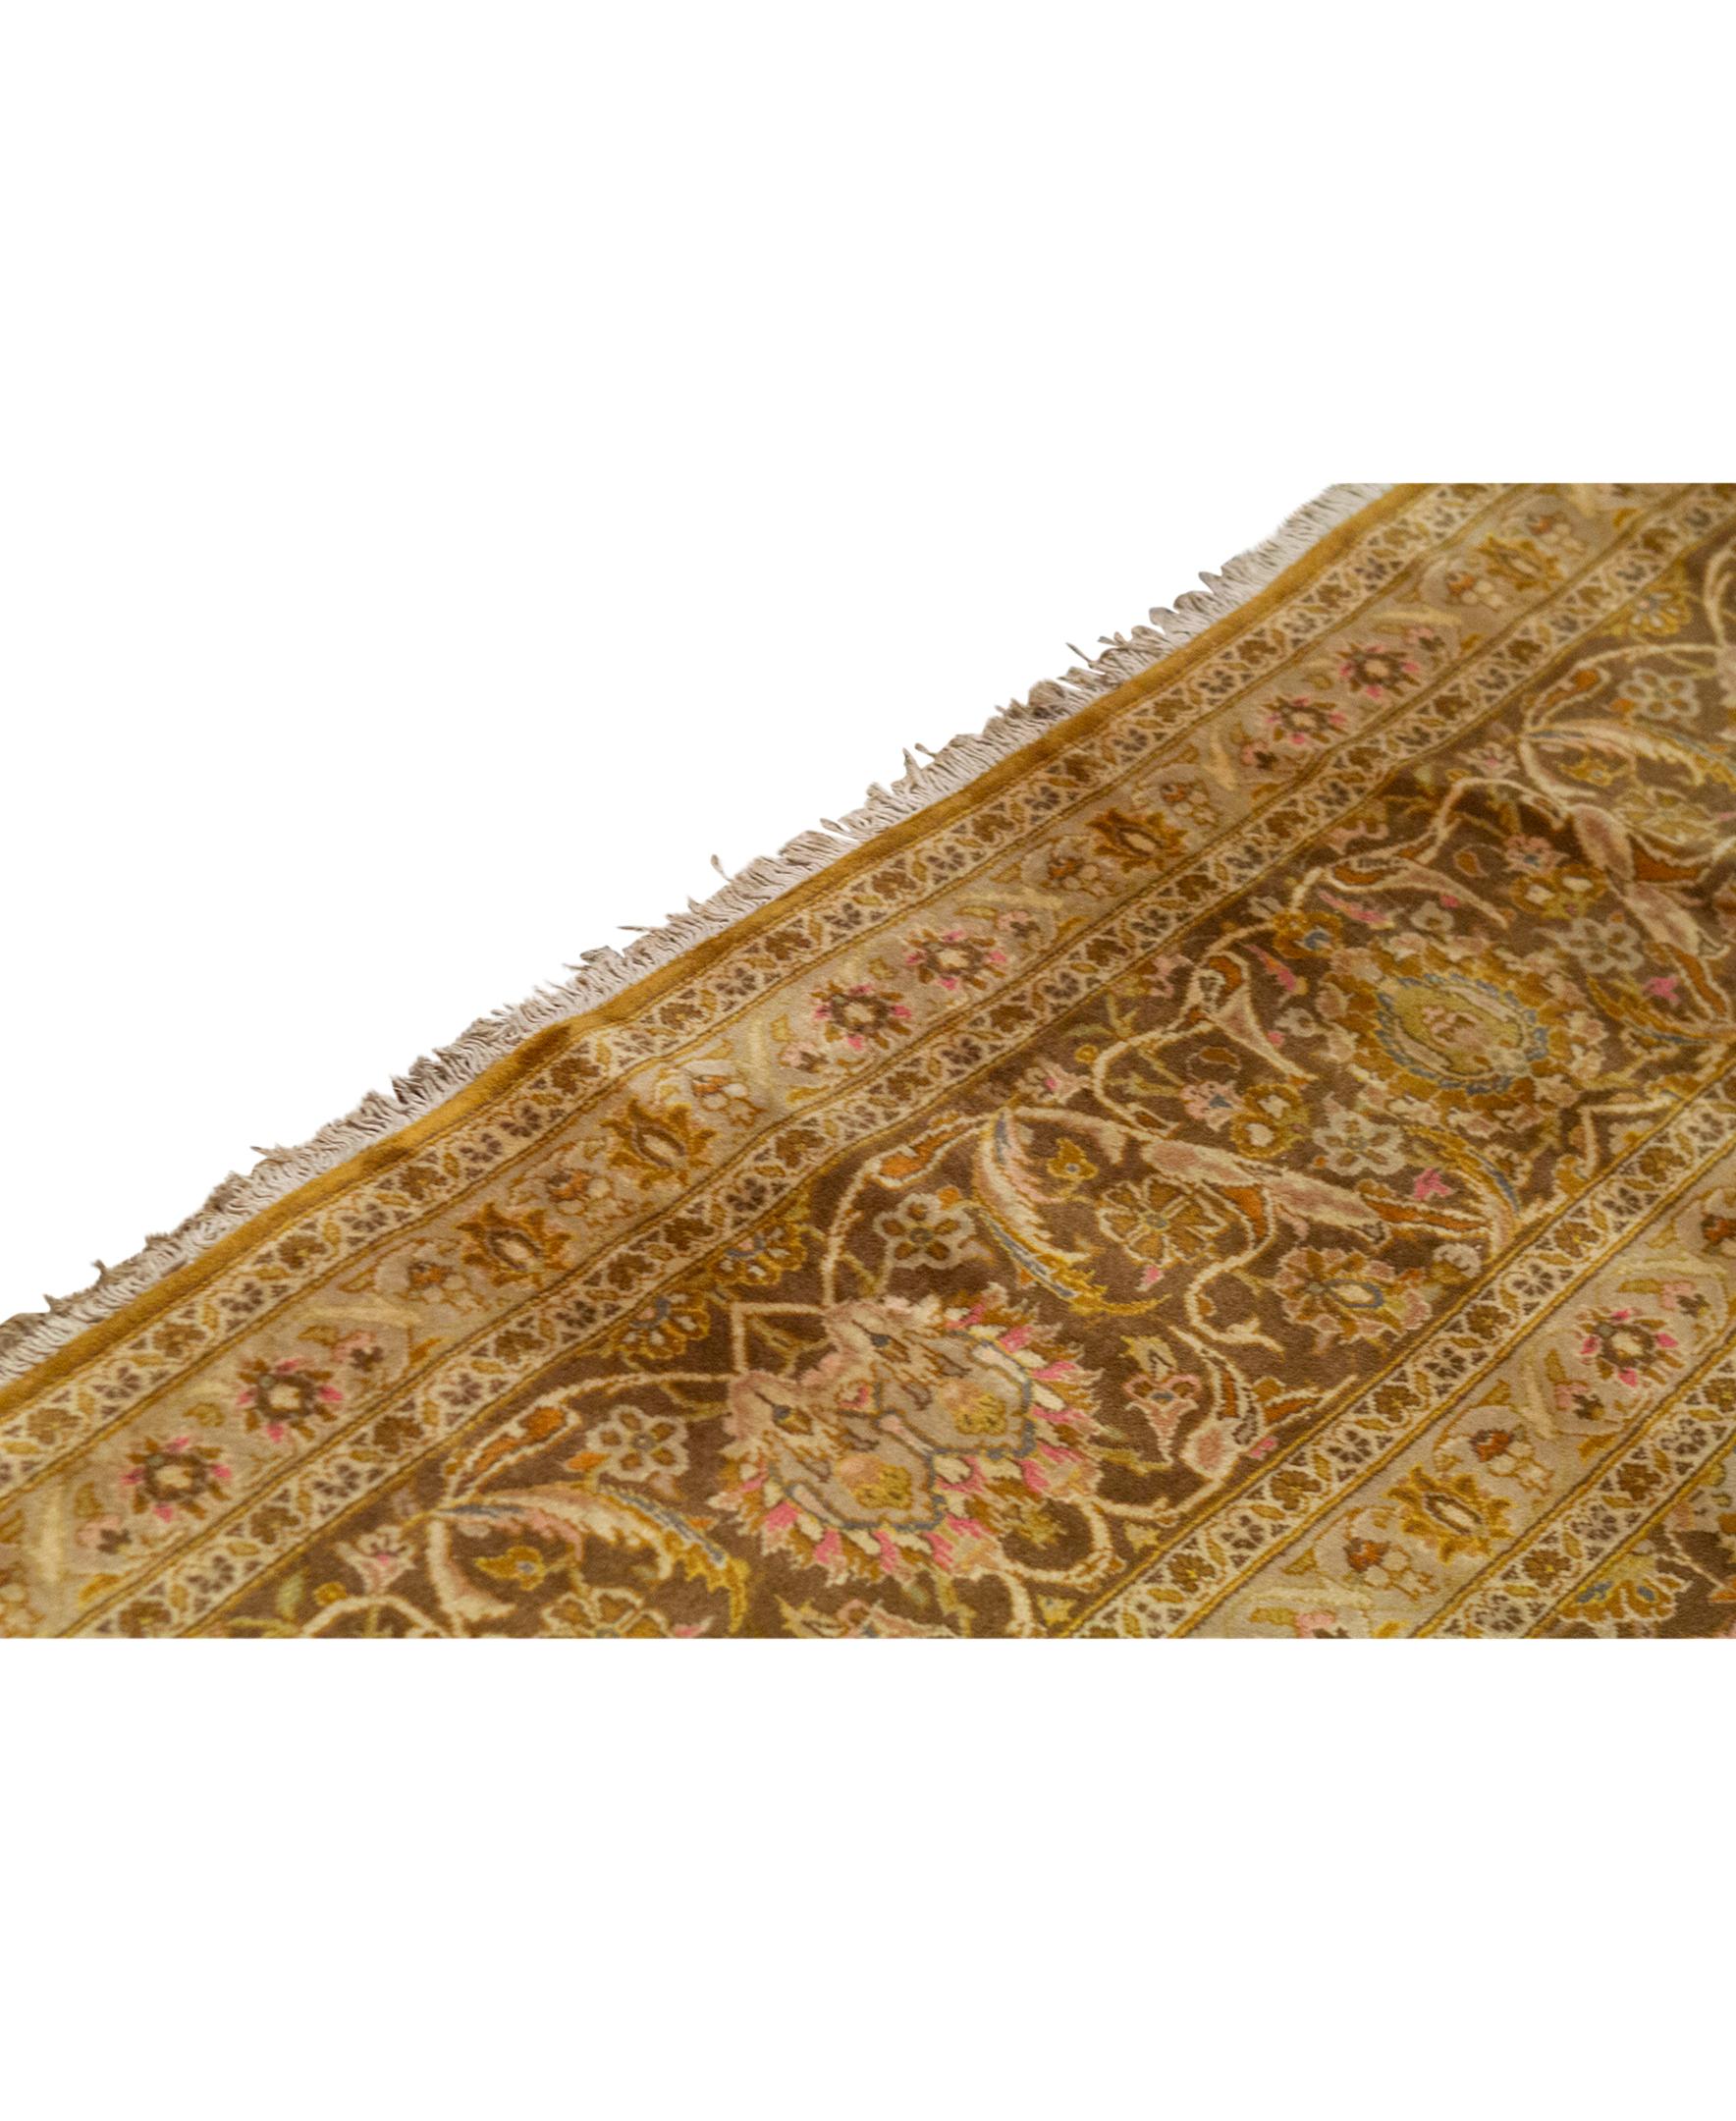   Antique Persian Fine Traditional Handwoven Luxury Wool Brown Rug. Size: 10' X 13'-7